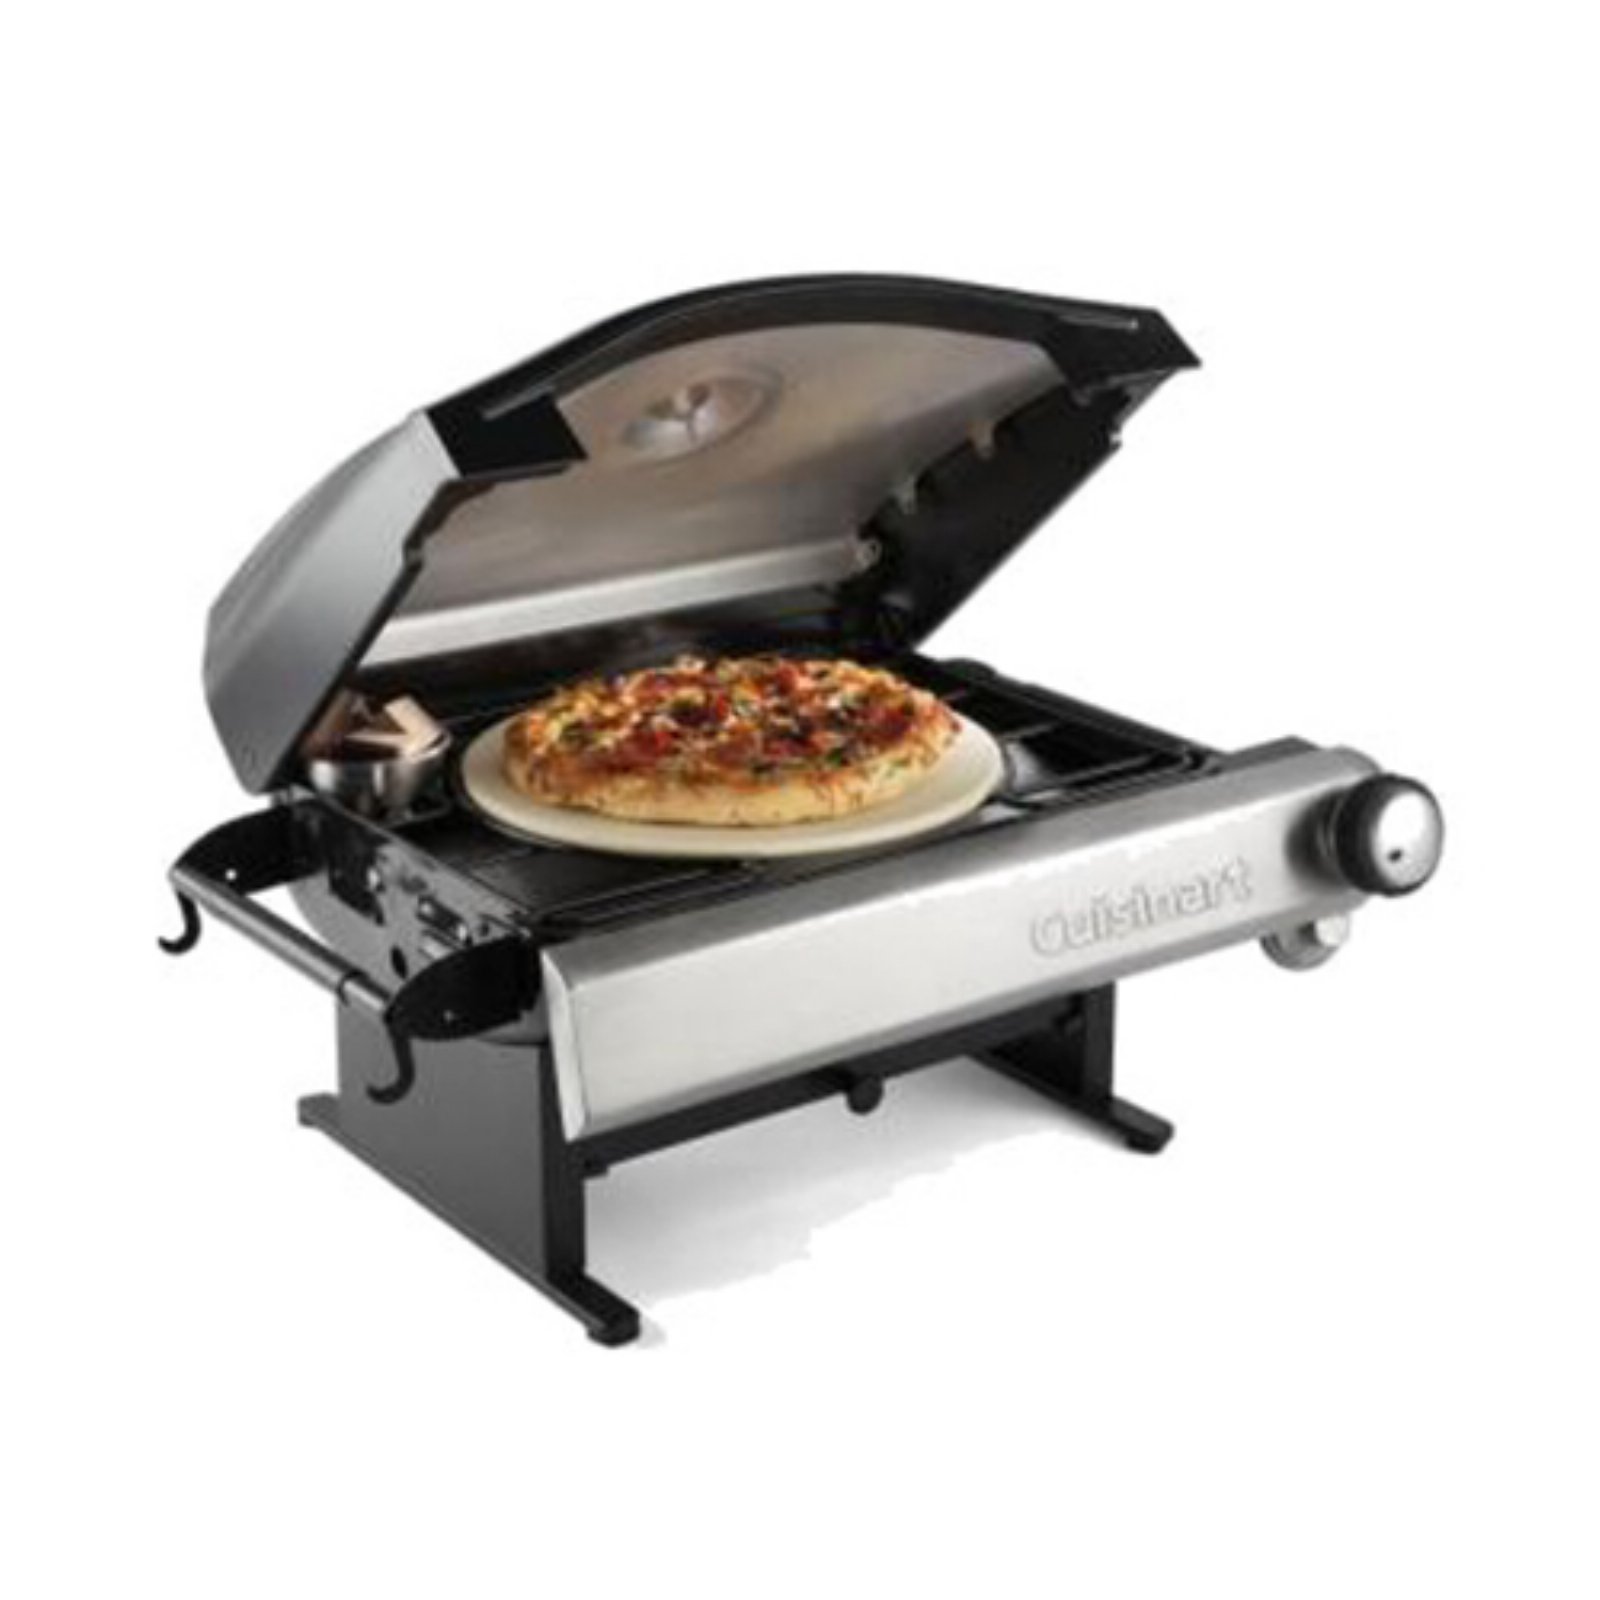 Cuisinart Alfrescamore Outdoor Pizza Oven with Accessories - image 4 of 7